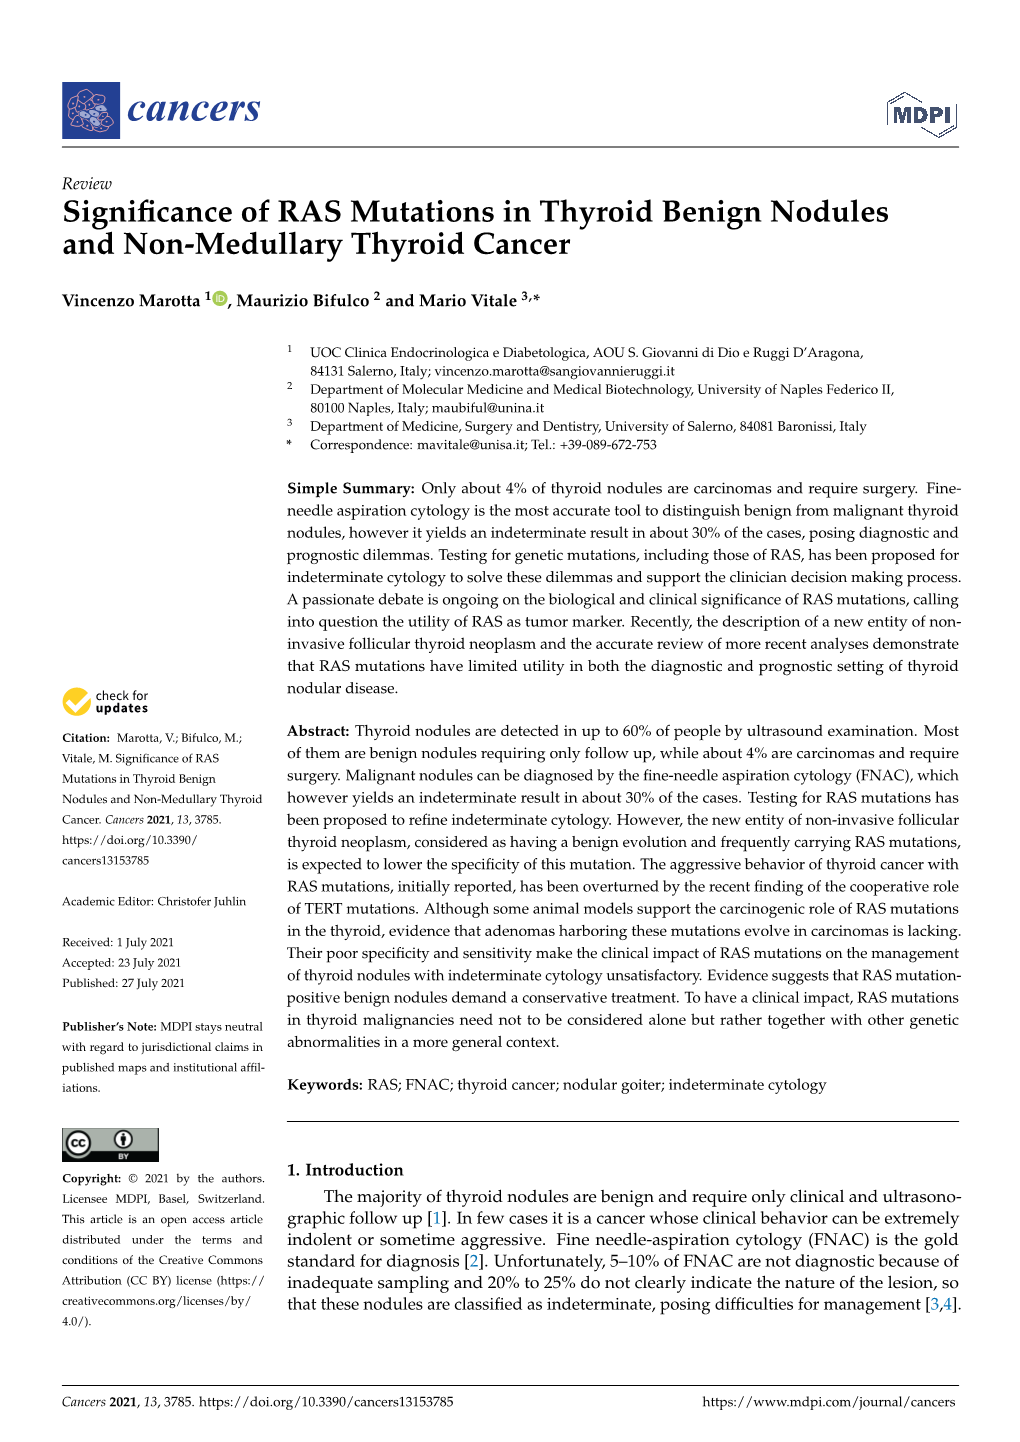 Significance of RAS Mutations in Thyroid Benign Nodules and Non